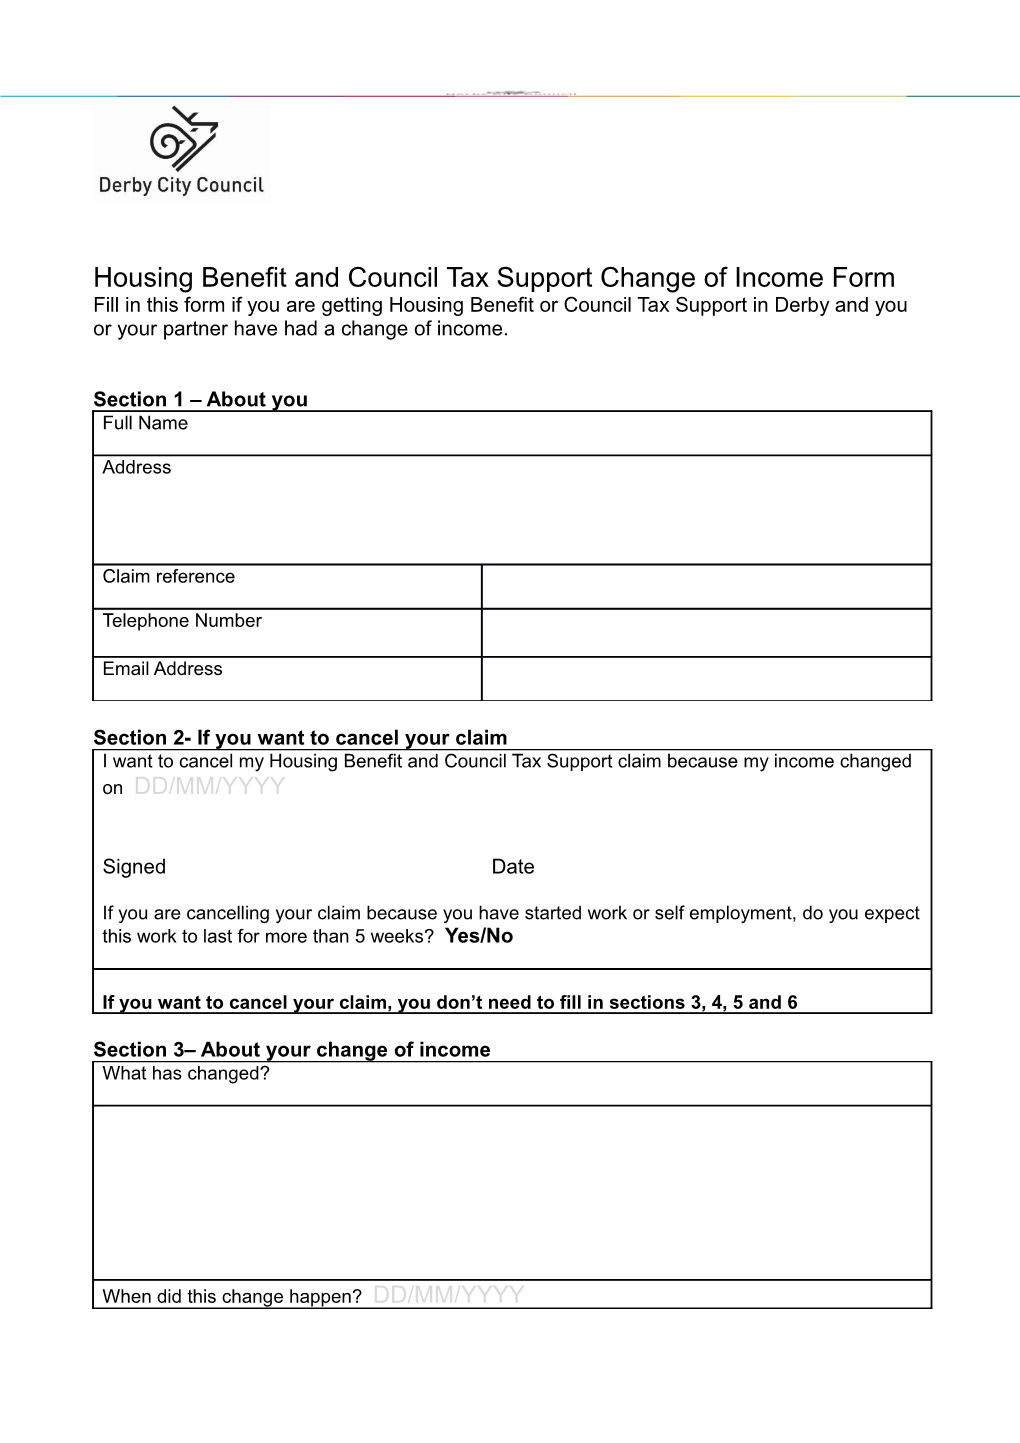 Housingbenefit and Council Tax Support Change of Income Form